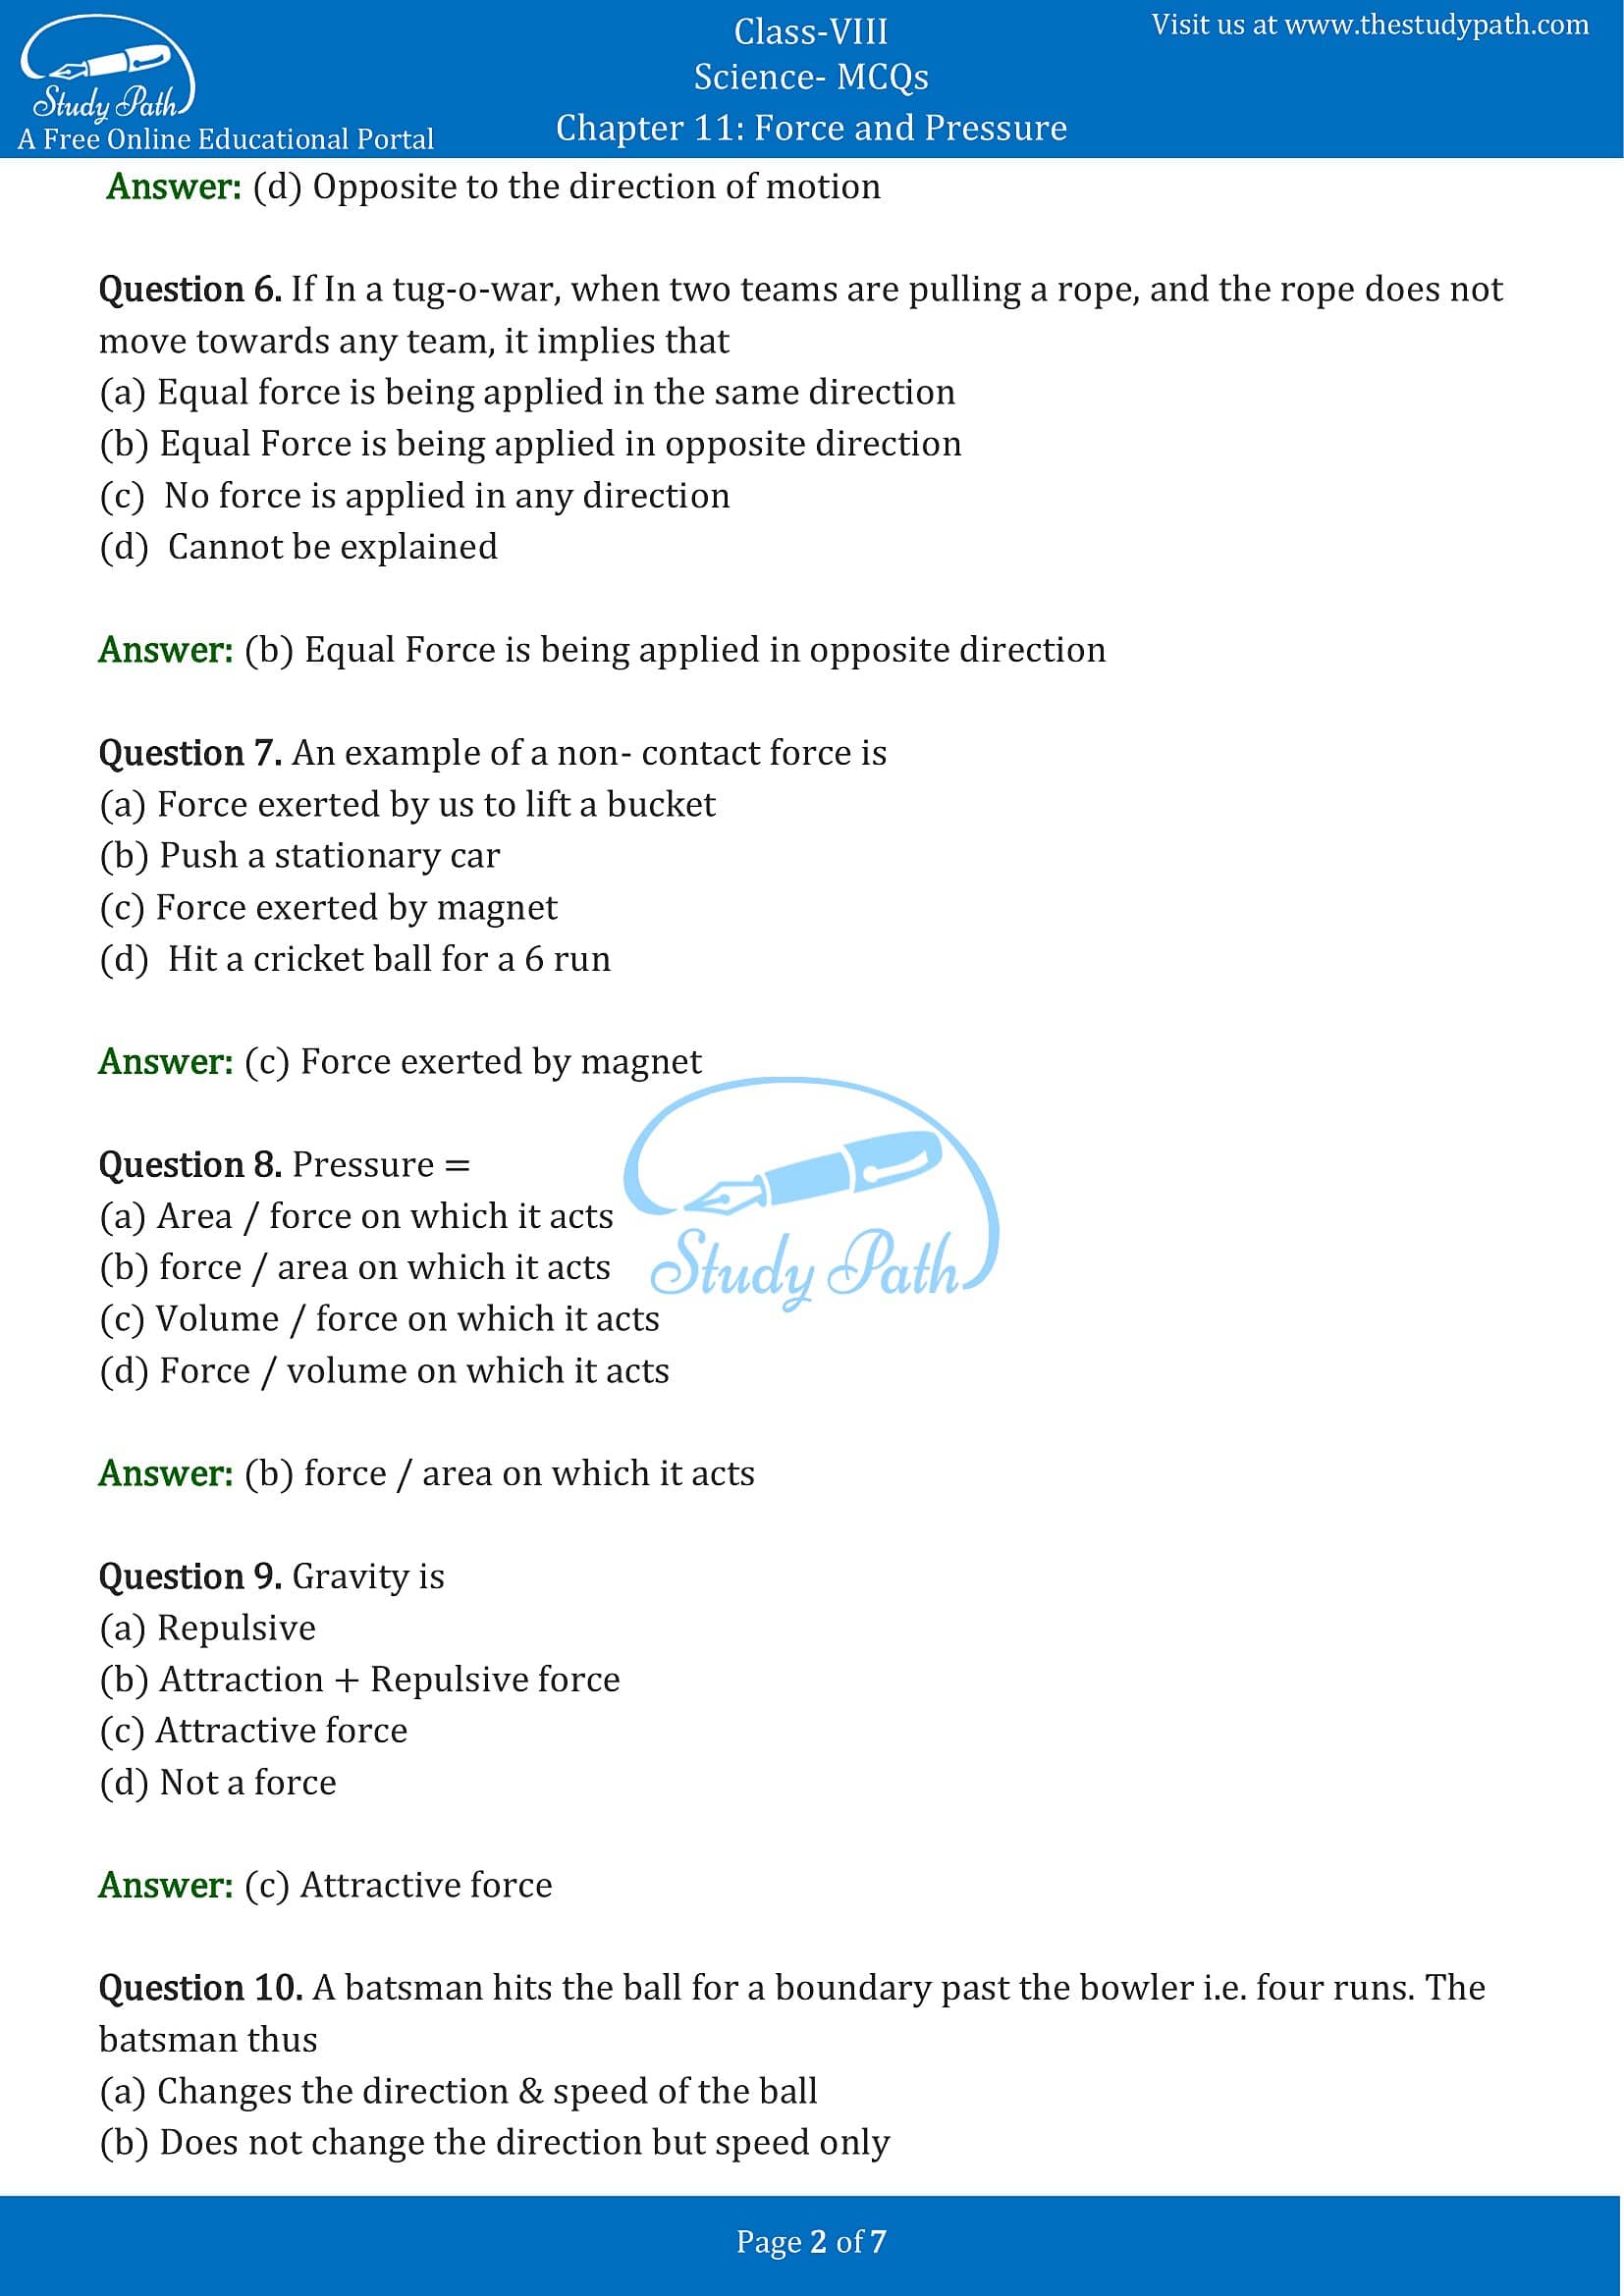 MCQ Questions for Class 8 Science Chapter 11 Force and Pressure with Answers PDF -2